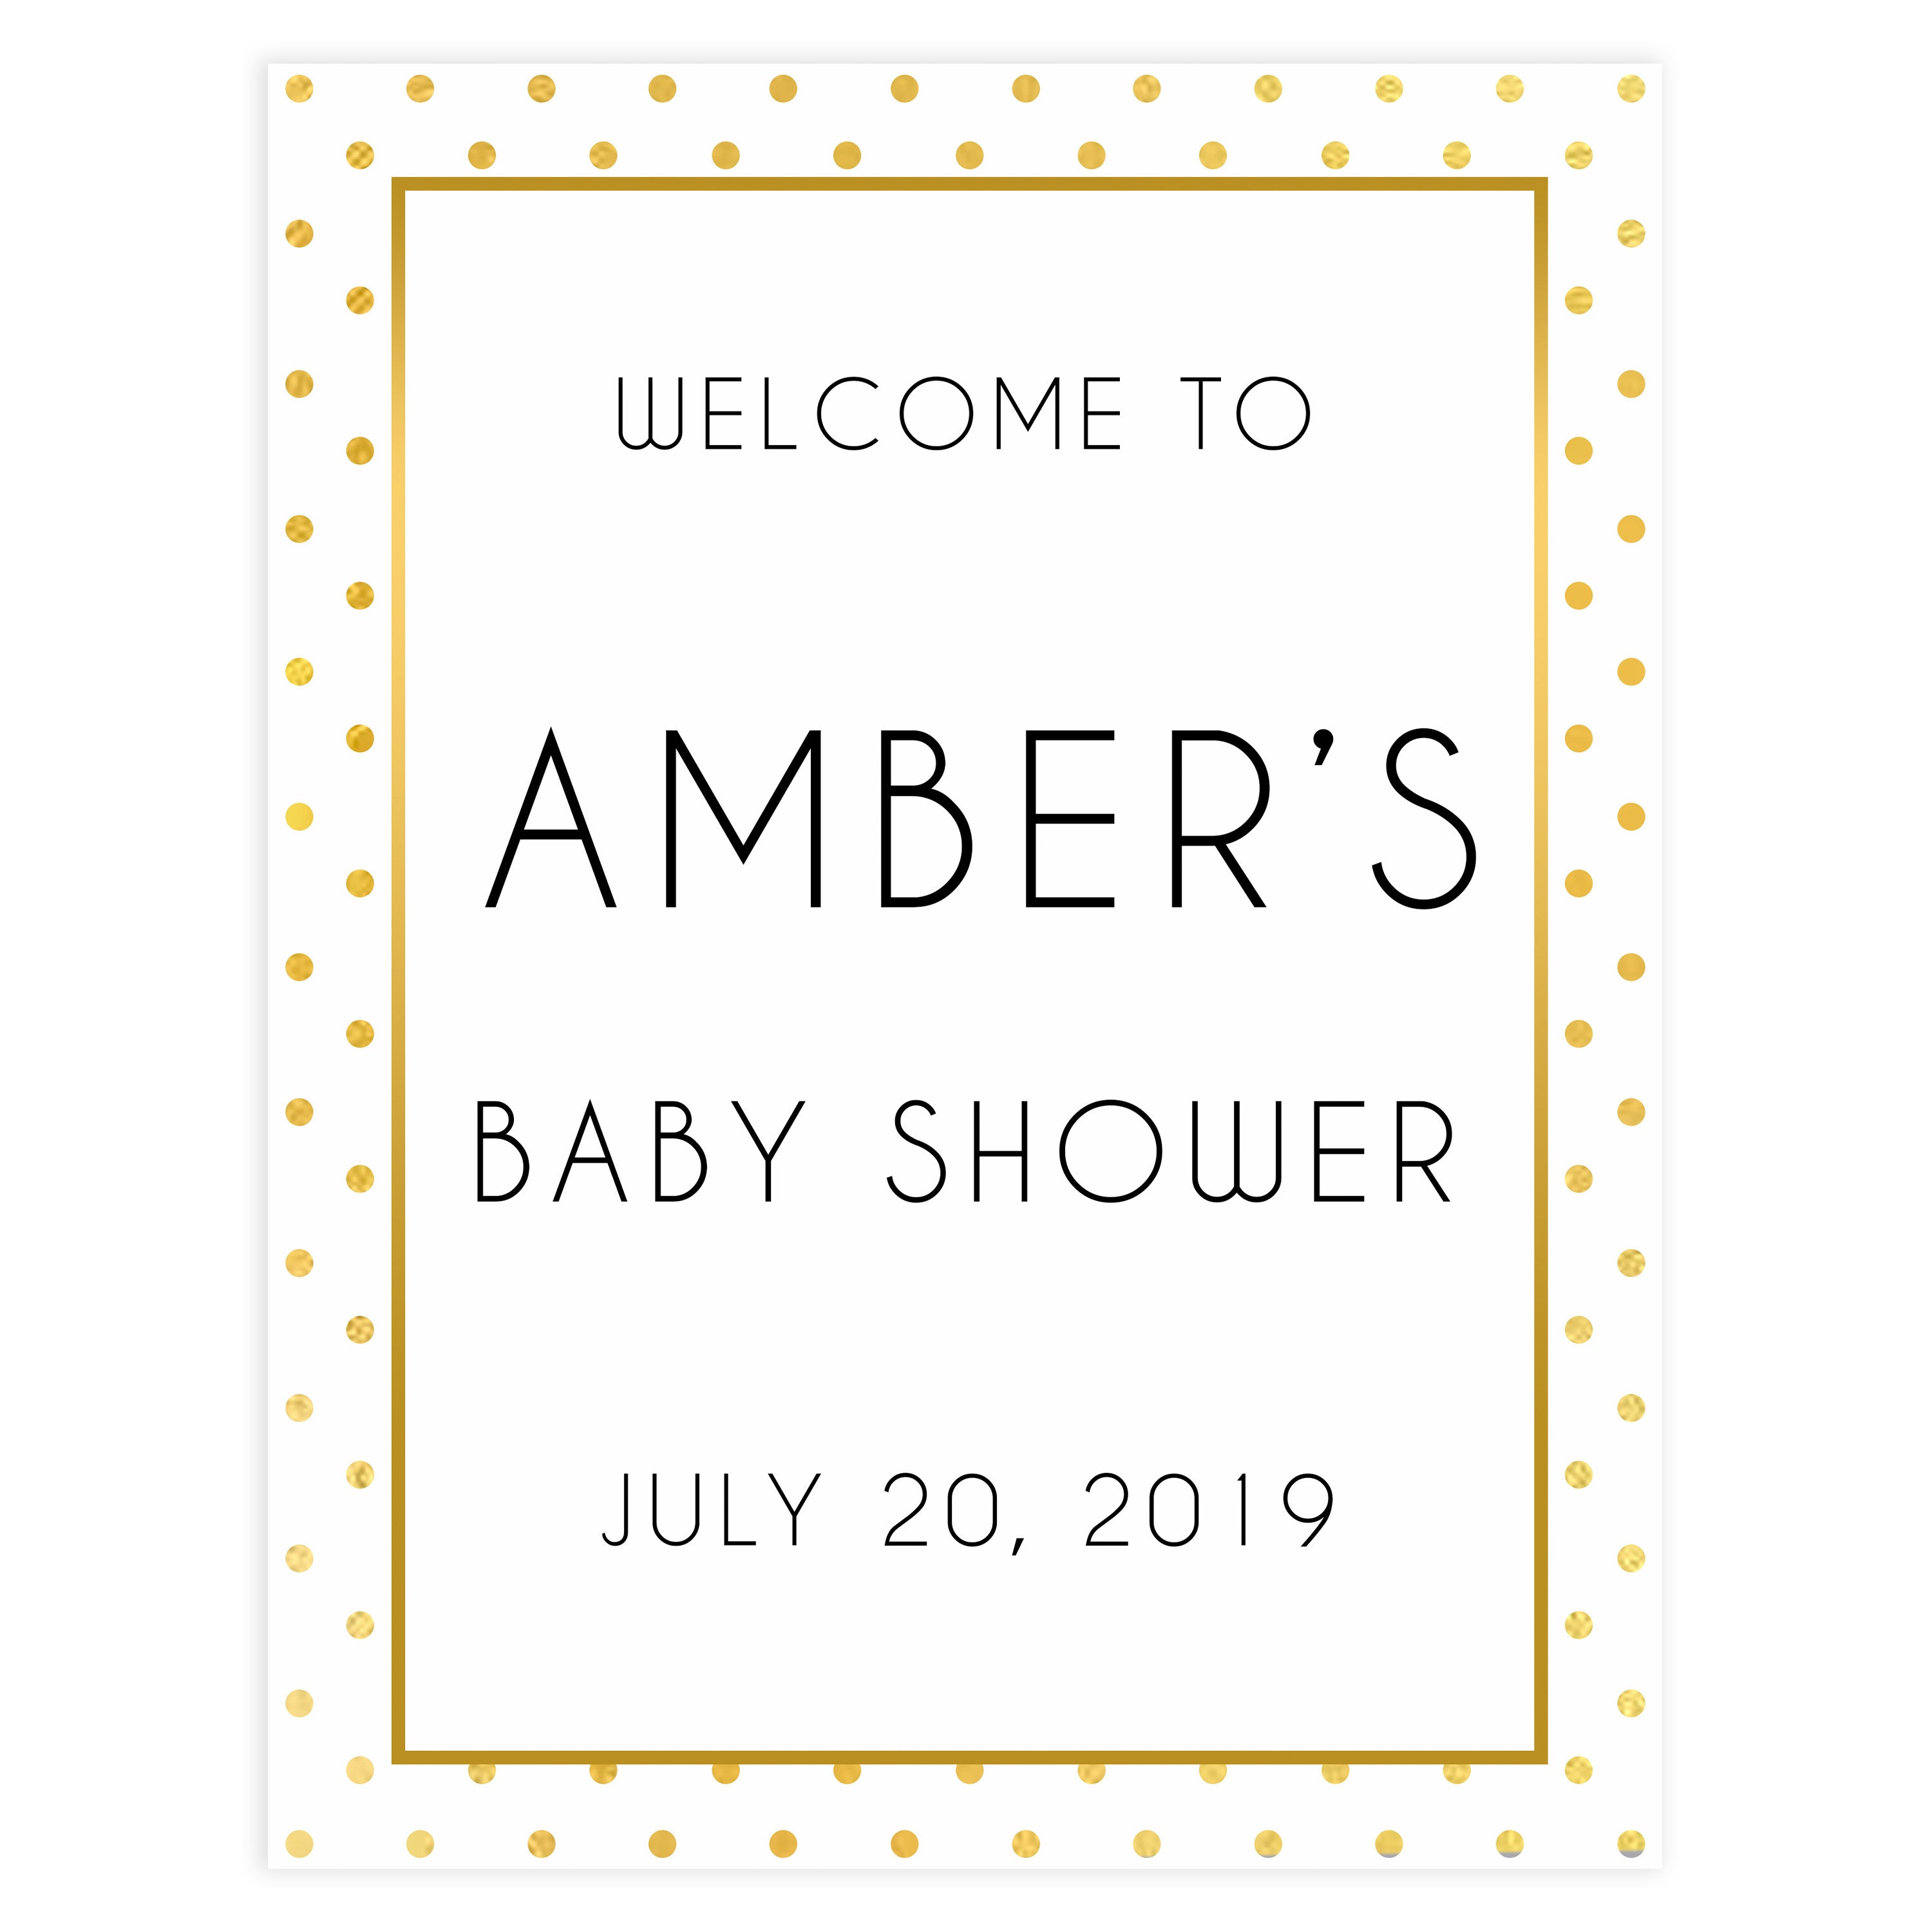 baby shower welcome signs, printable baby shower welcome sign, baby shower decor, baby shower table signs, gold baby shower ideas